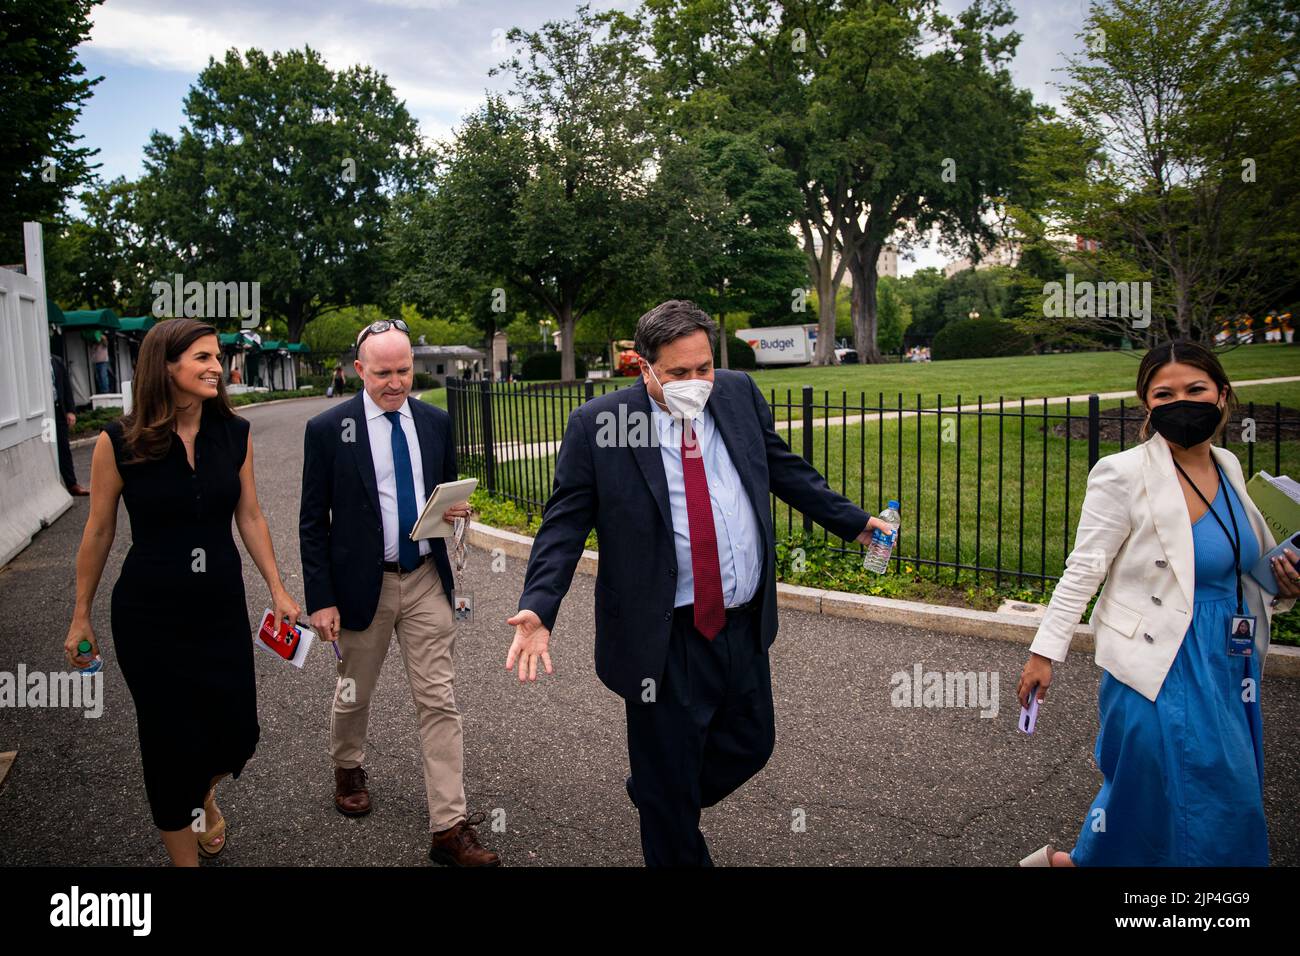 Ron Klain, White House chief of staff, center, reacts to questions from Kaitlan Collins, chief White House correspondent for CNN, left, and Jeff Mason, White House correspondent for Reuters, as he returns to the West Wing with Remi Yamamoto, White House senior advisor for communications for the White House chief of staff, right, following a television interview on the North Lawn of the White House in Washington, DC, US, on Monday, Aug. 8, 2022. US President Joe Biden resumed official travel today for the first time since his bout with Covid-19, traveling to Kentucky to show federal support f Stock Photo